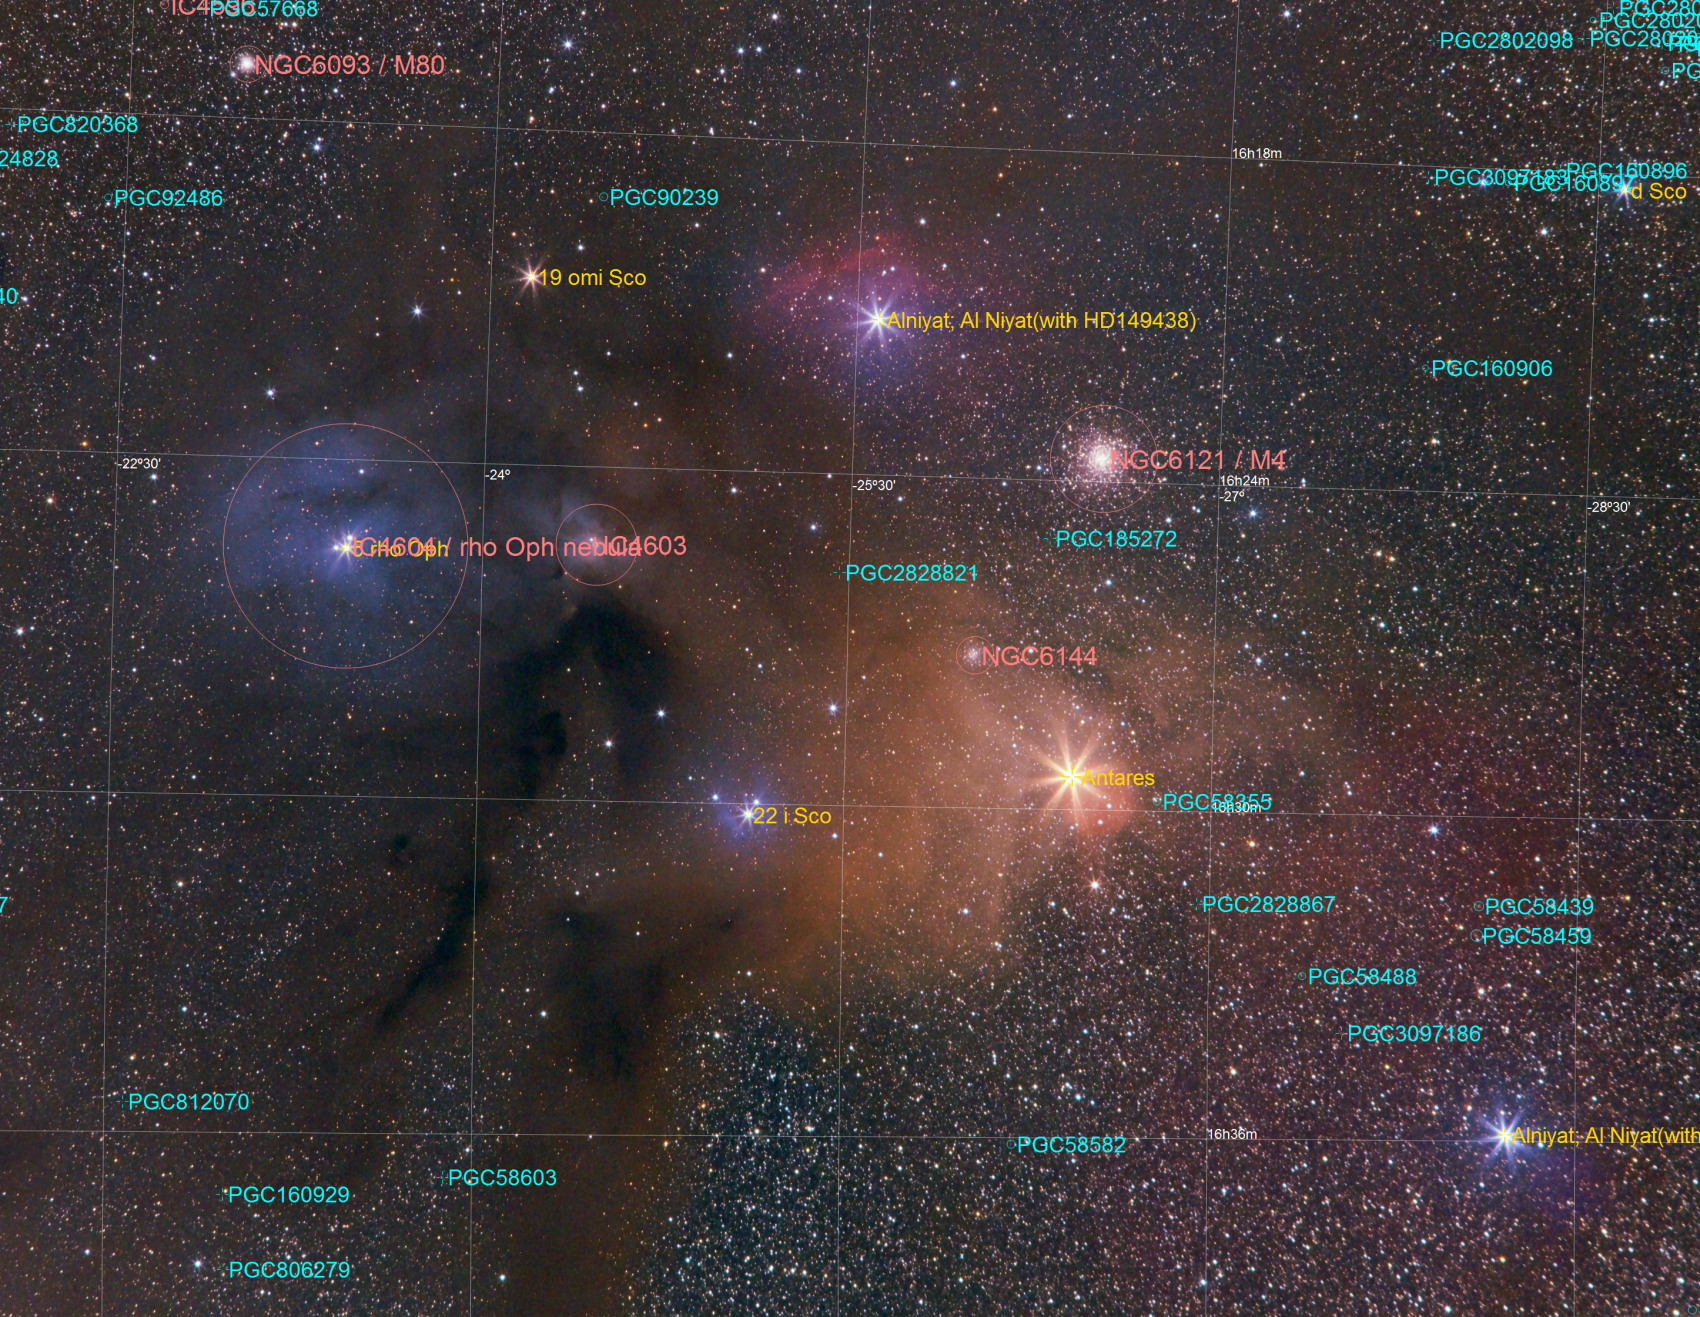 Antares_Annotated.JPG.ace031ce50844eea81